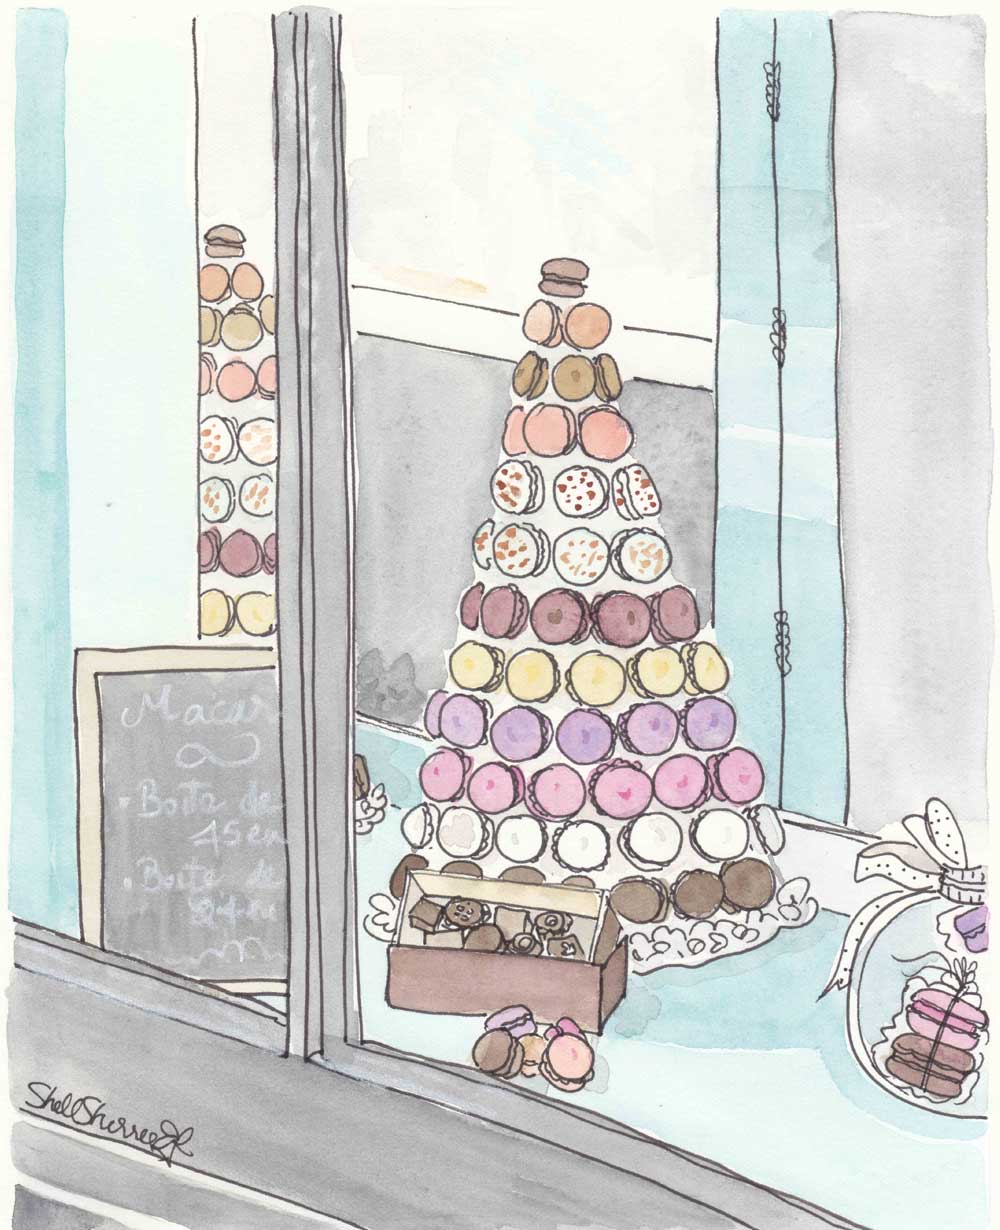 french wall art print macaron tower in paris patisserie by shell sherree